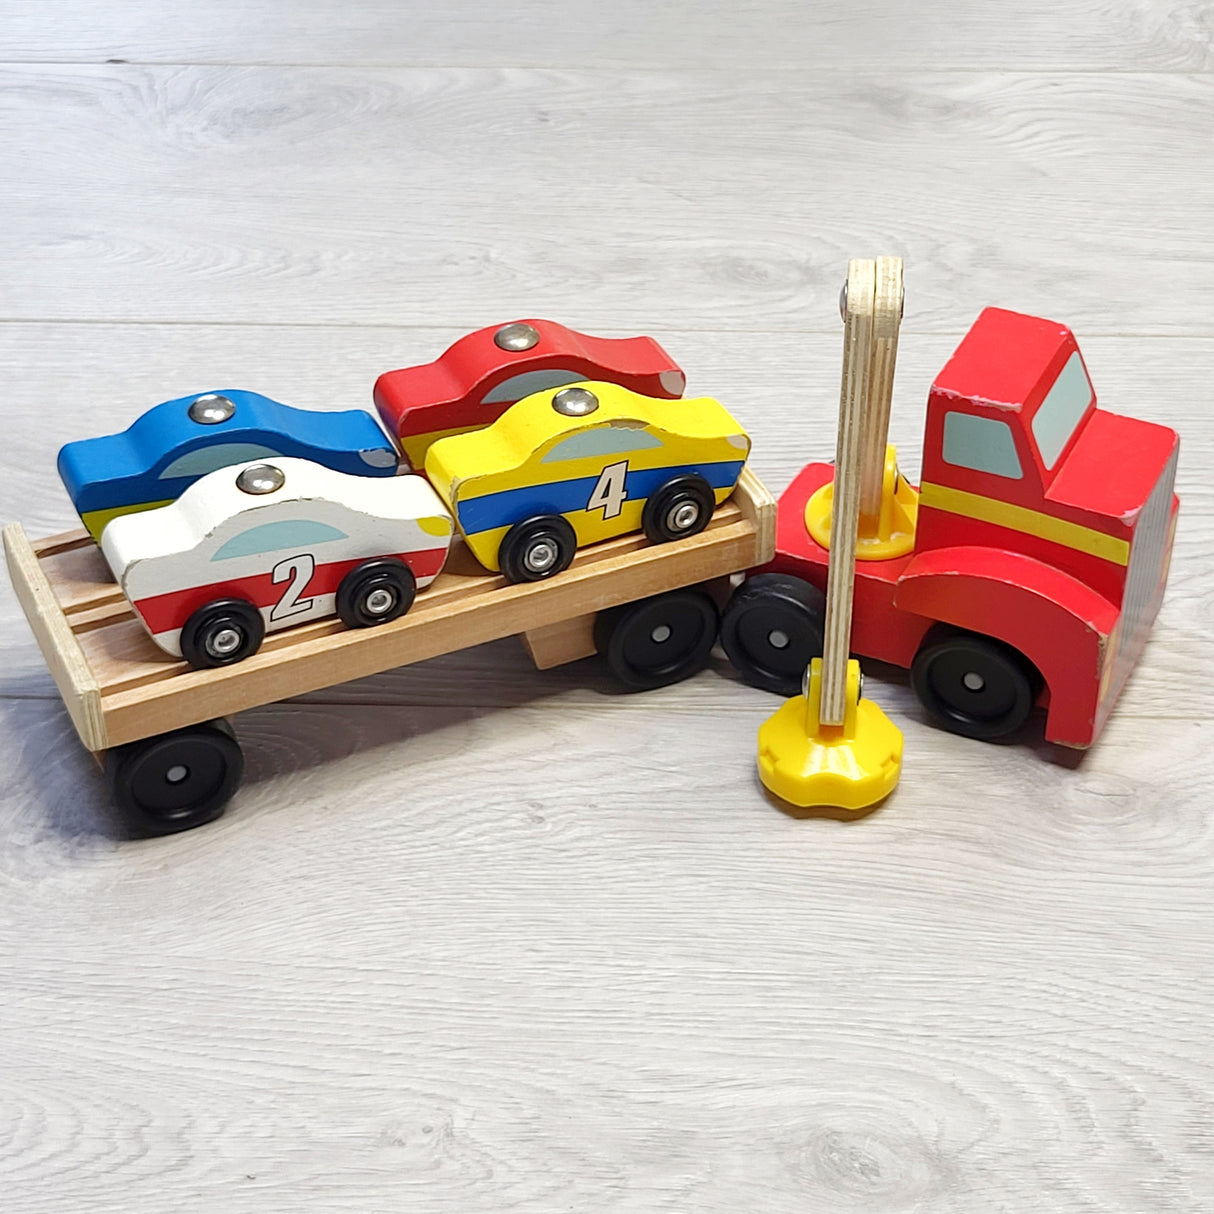 JHTC4 - Melissa and Doug wooden magnetic car loader toy